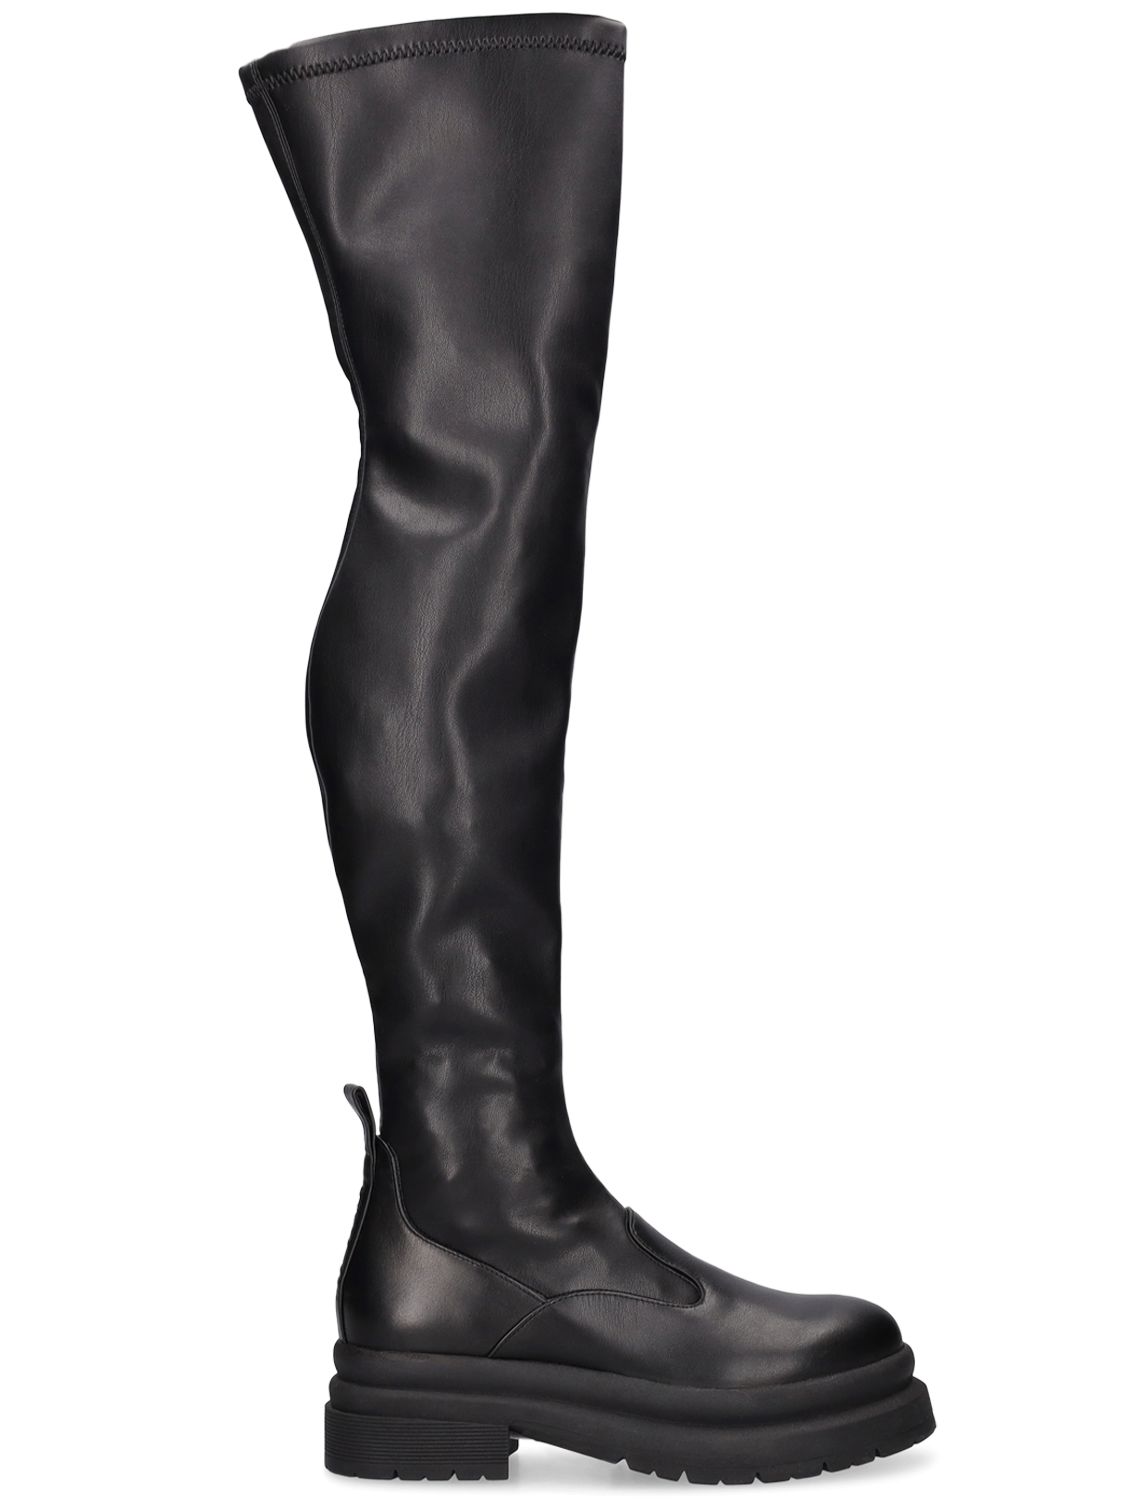 30mm Leather Knee High Boots